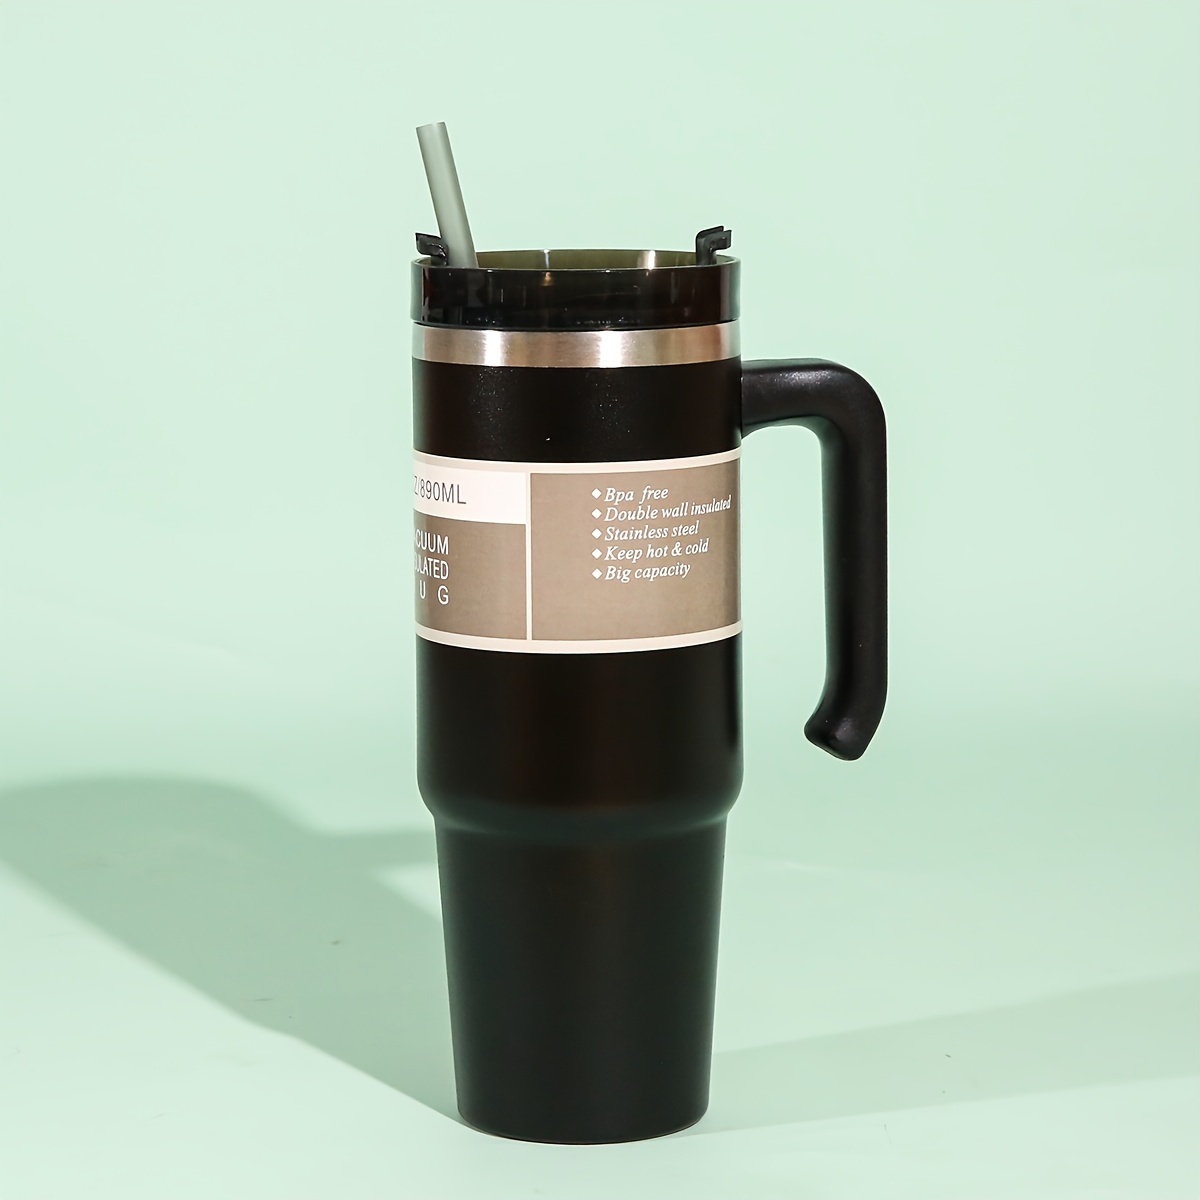 9 Highly Rated Travel Mugs to Keep Drinks Hot or Cold